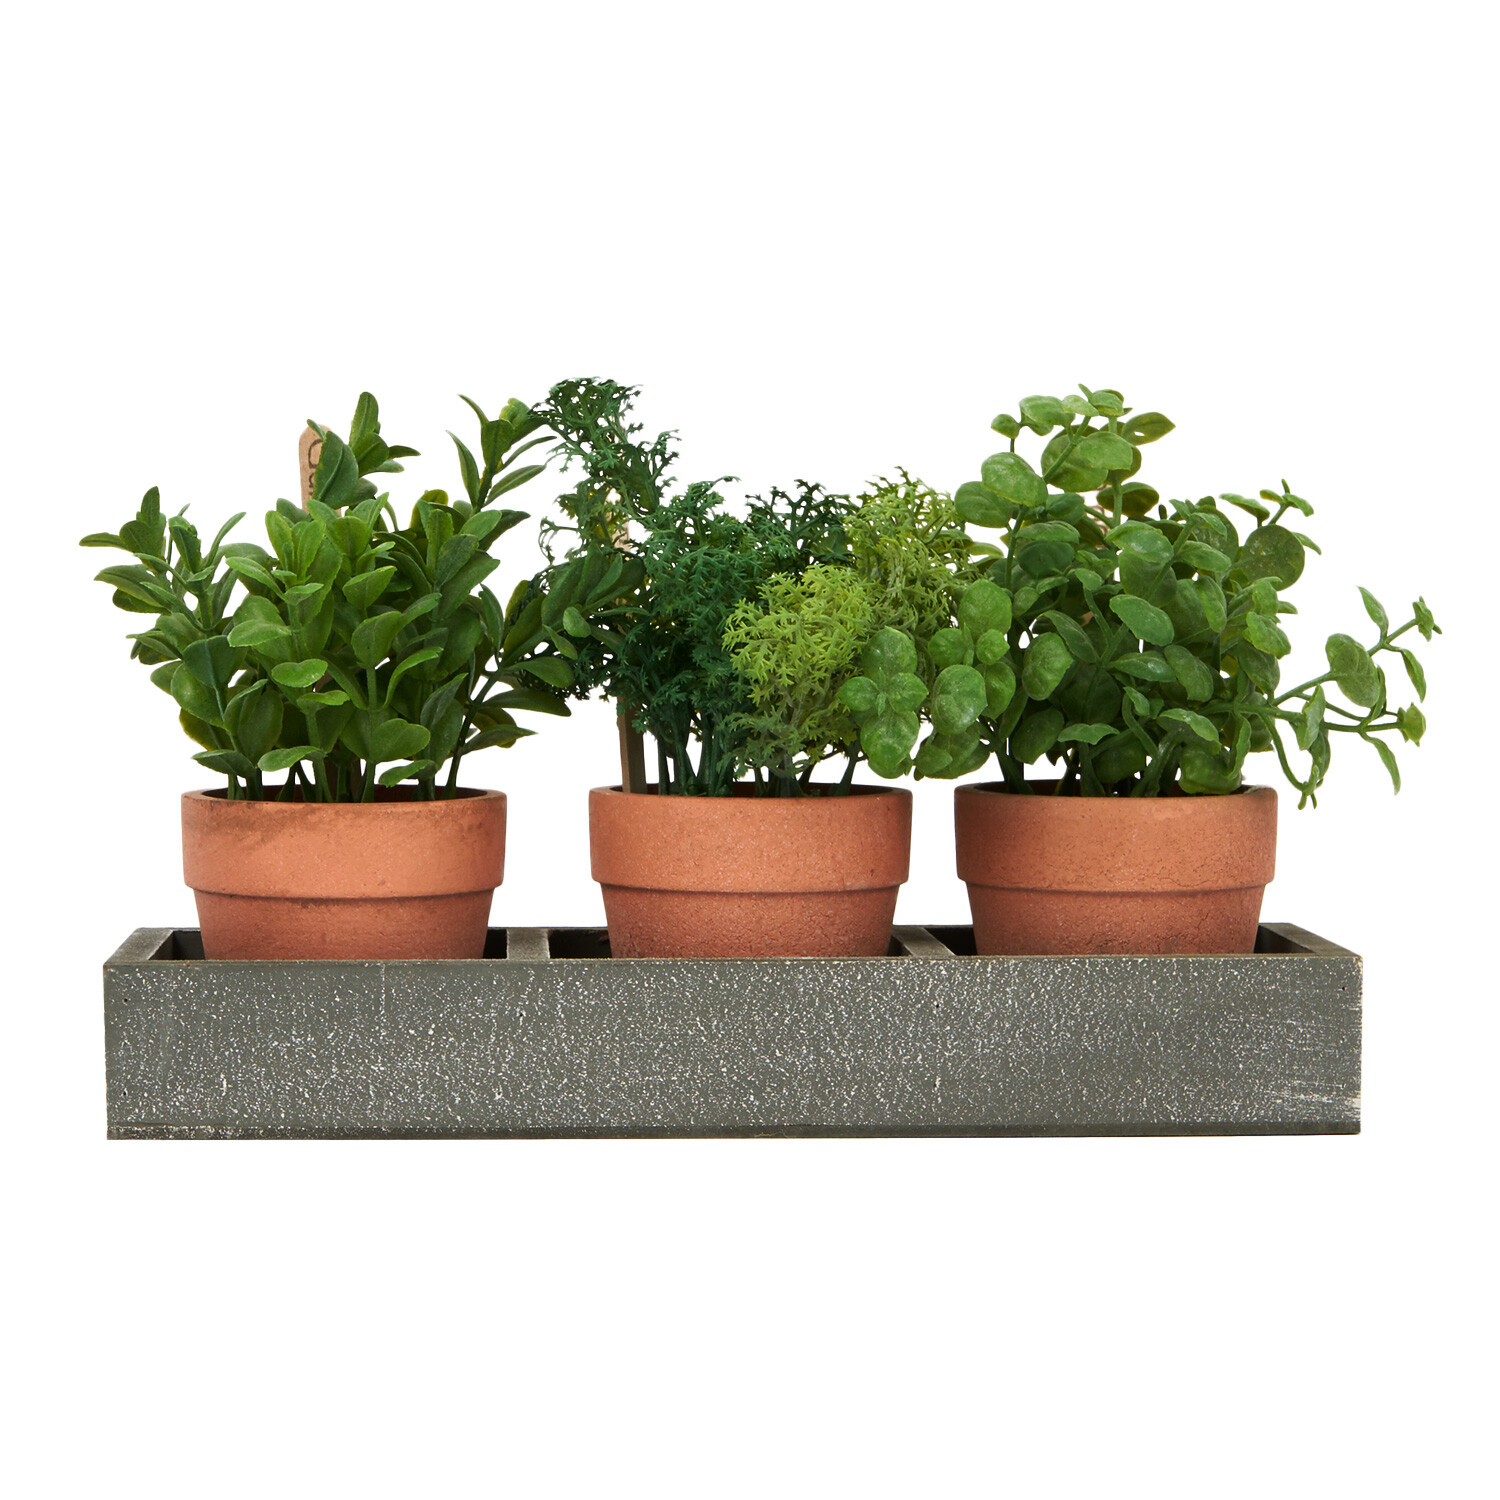 Set of 3 Potted Herbs in Tray - Grey Image 1